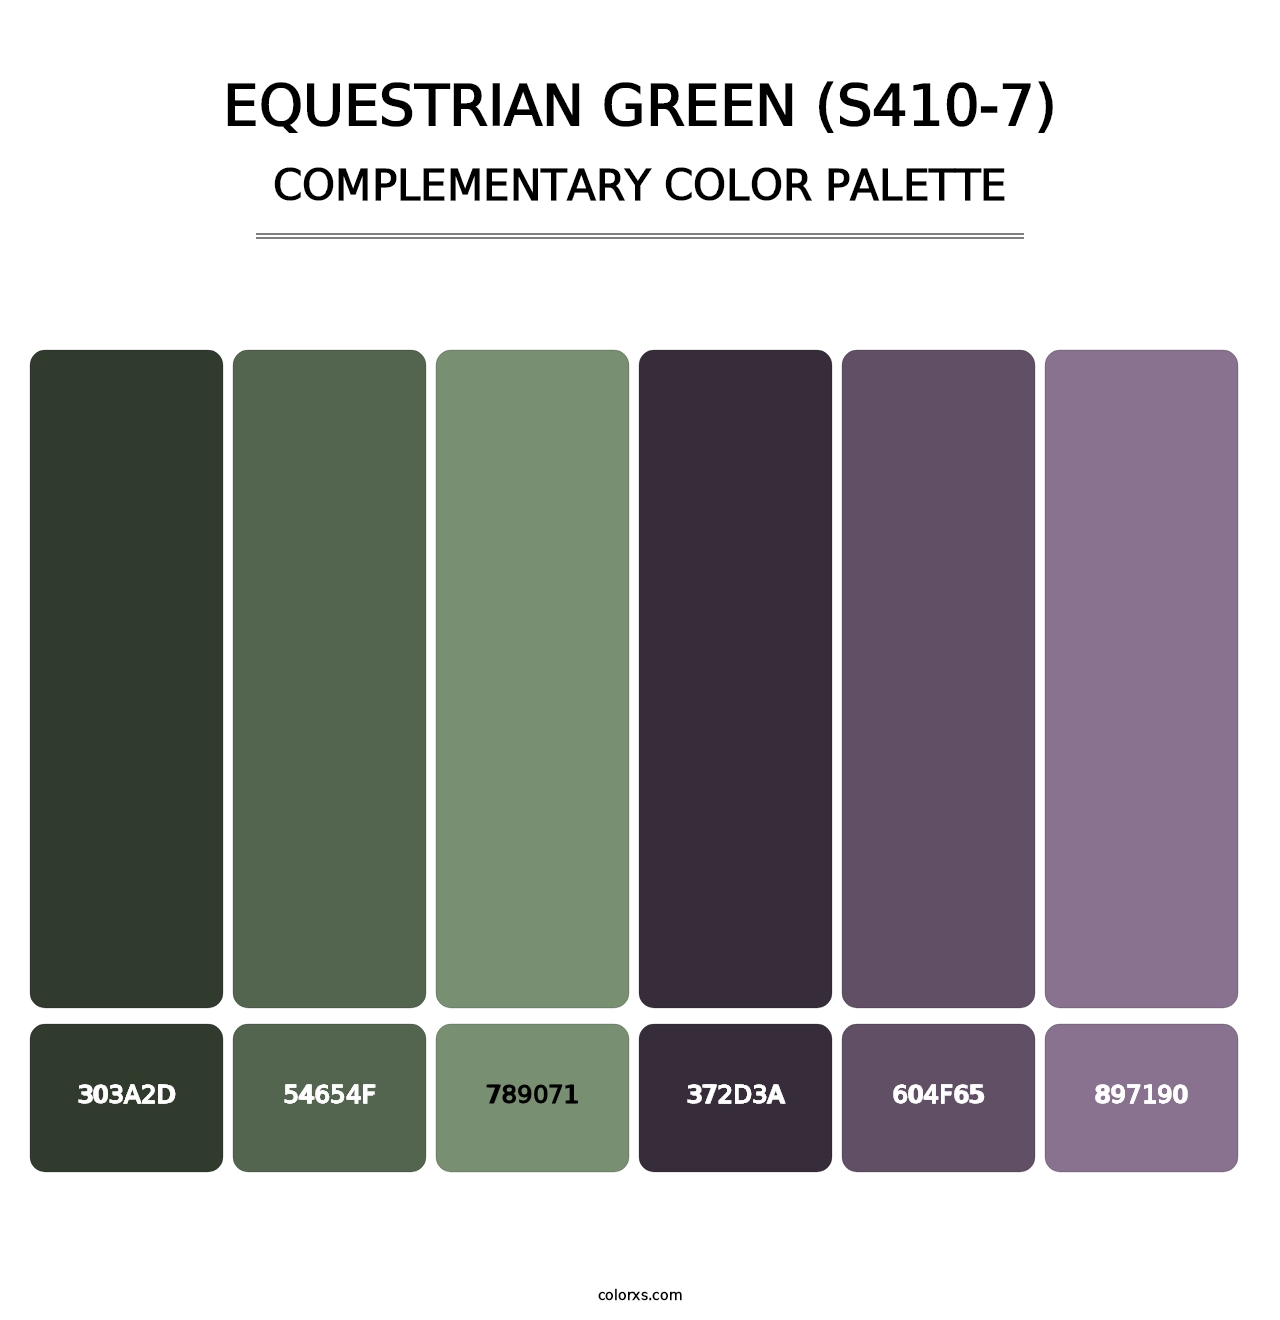 Equestrian Green (S410-7) - Complementary Color Palette